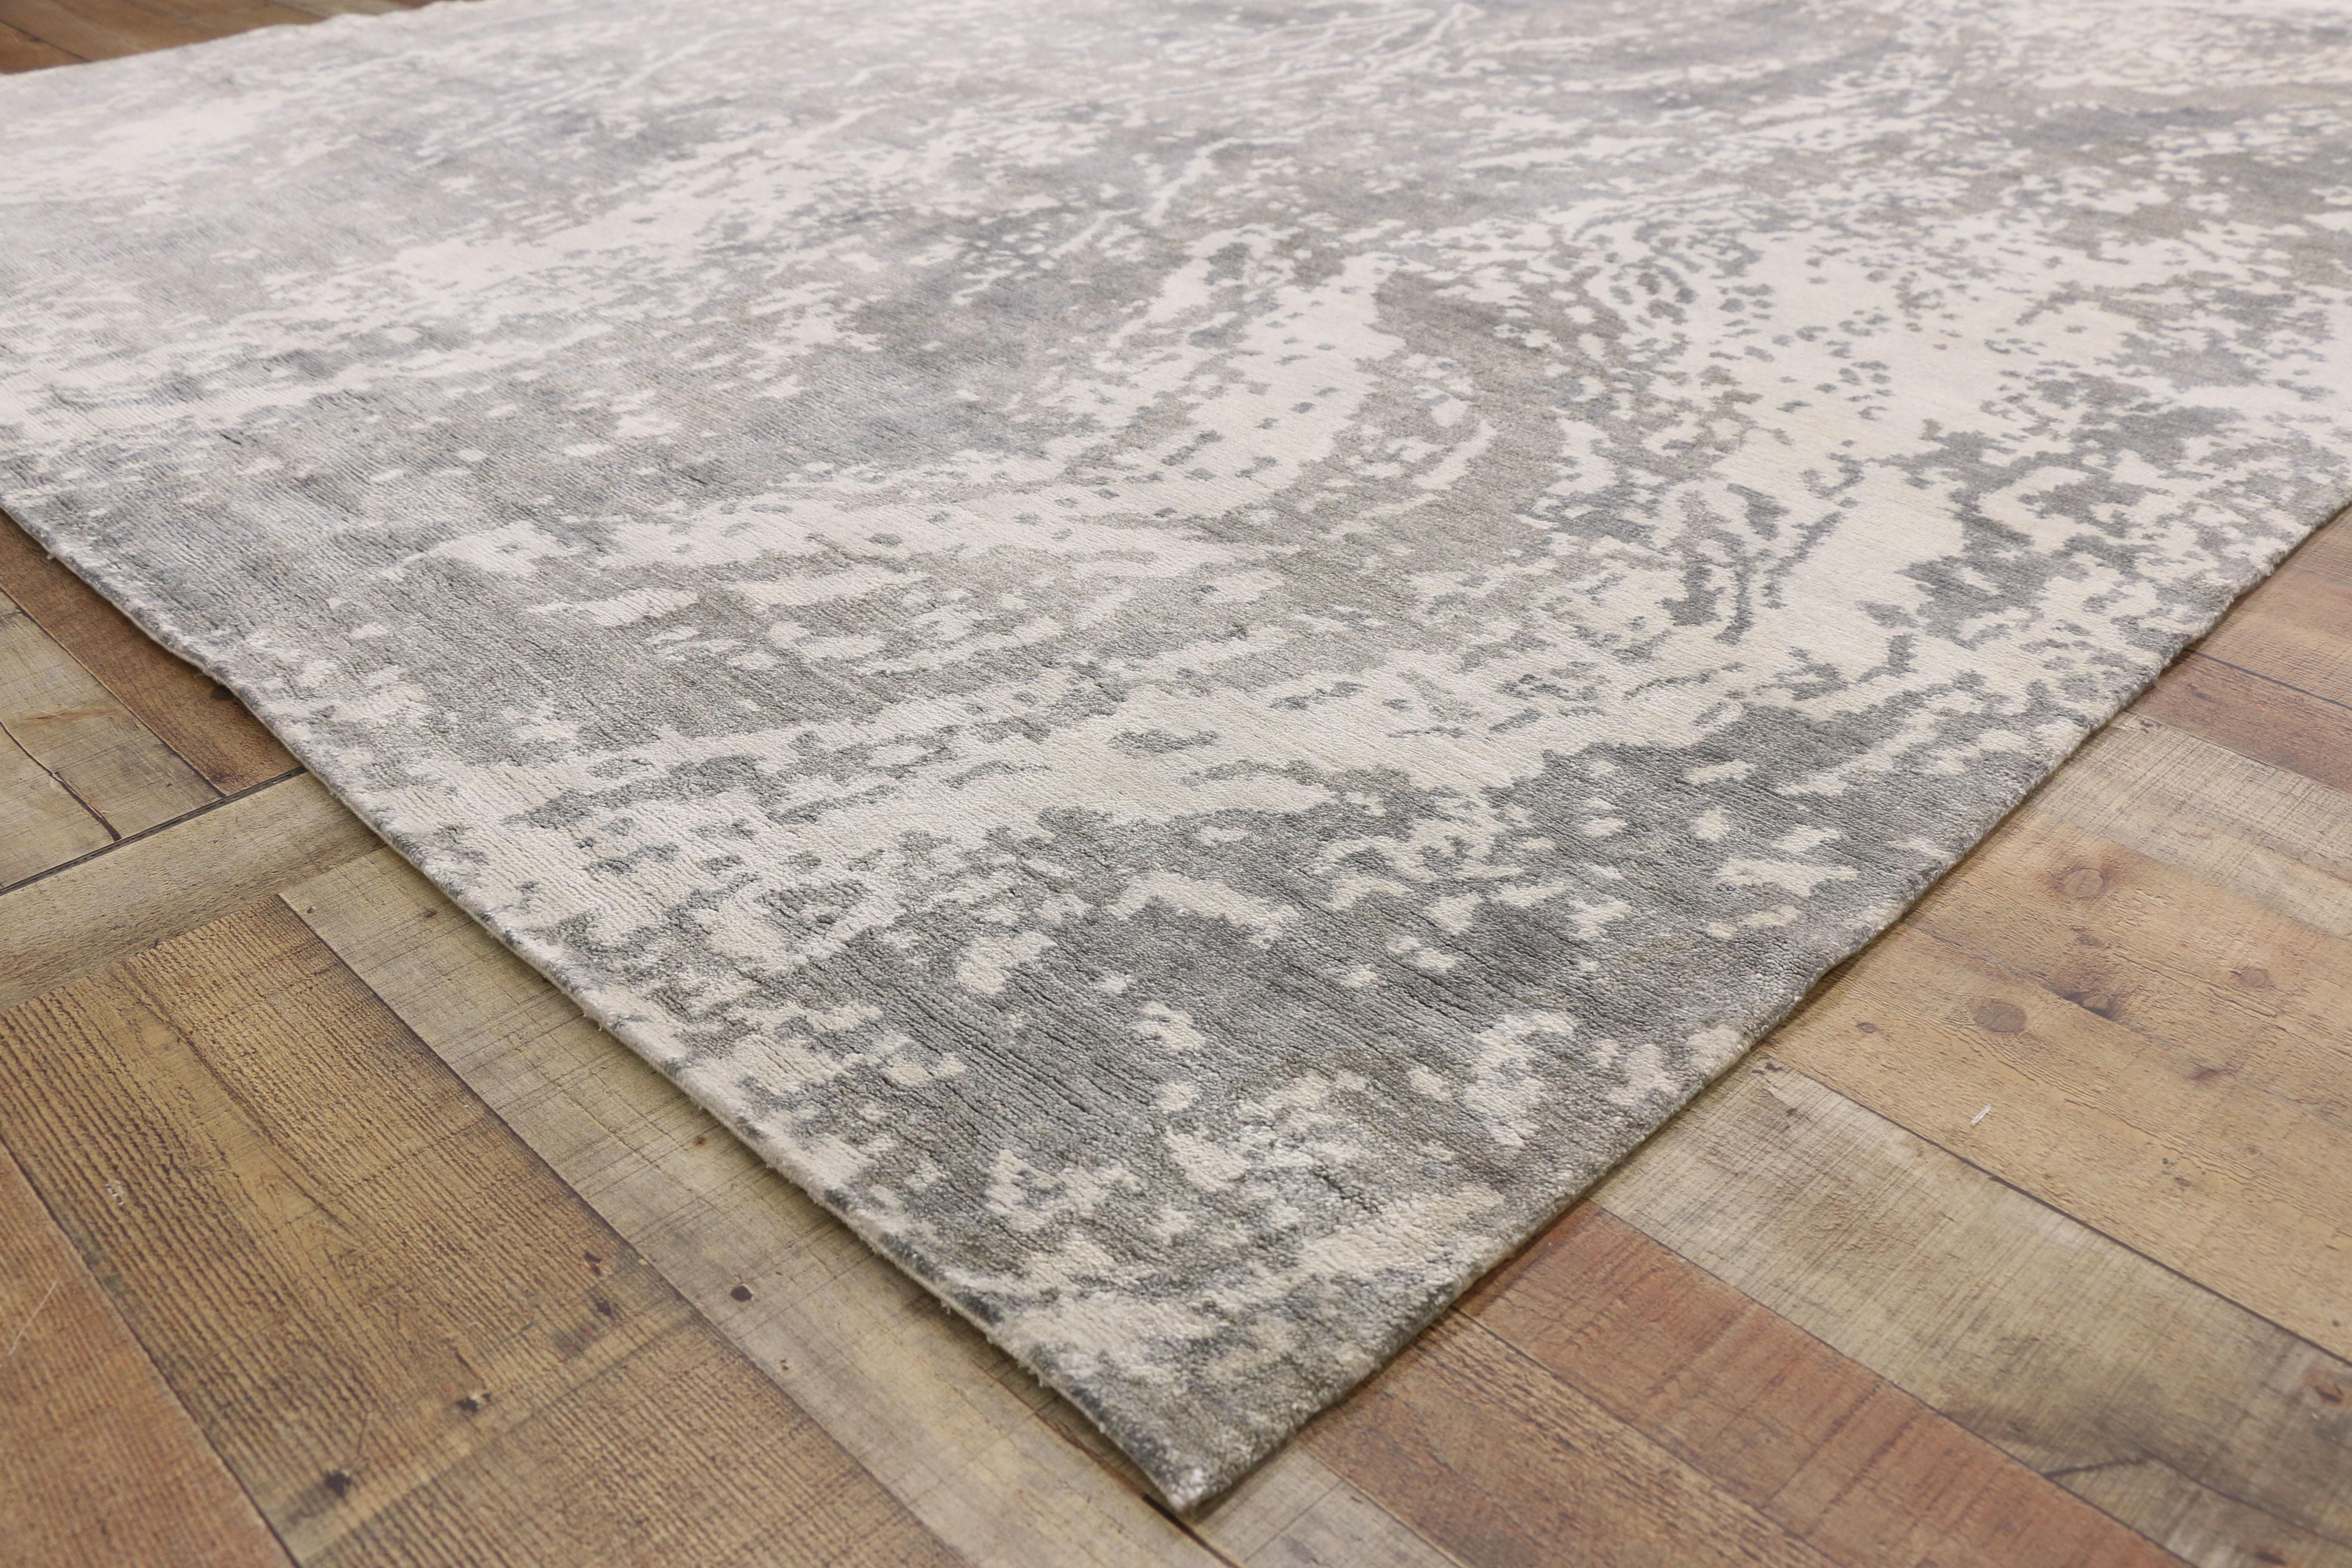 Indian New Contemporary Gray Area Rug with Grunge Art Style For Sale